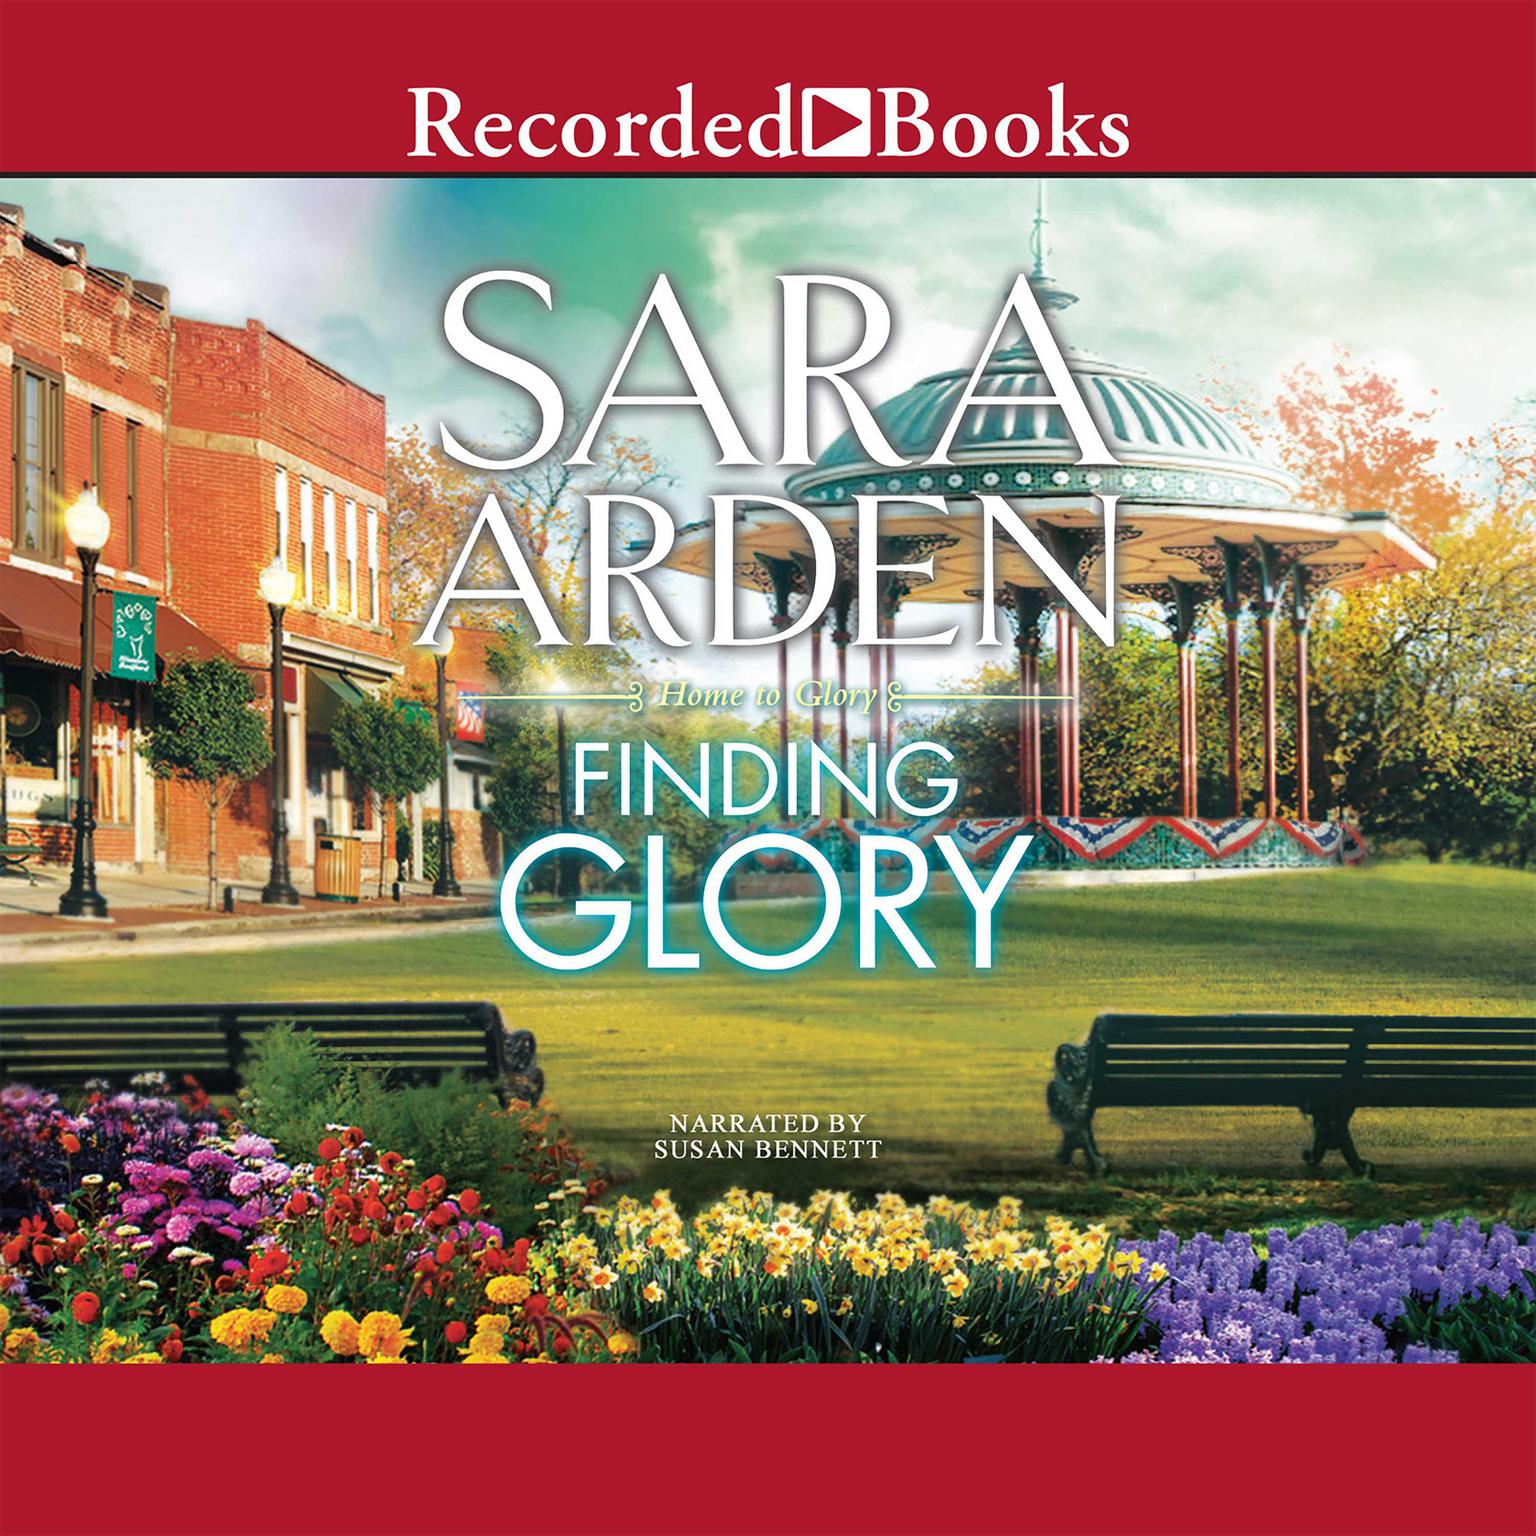 Finding Glory Audiobook, by Sara Arden